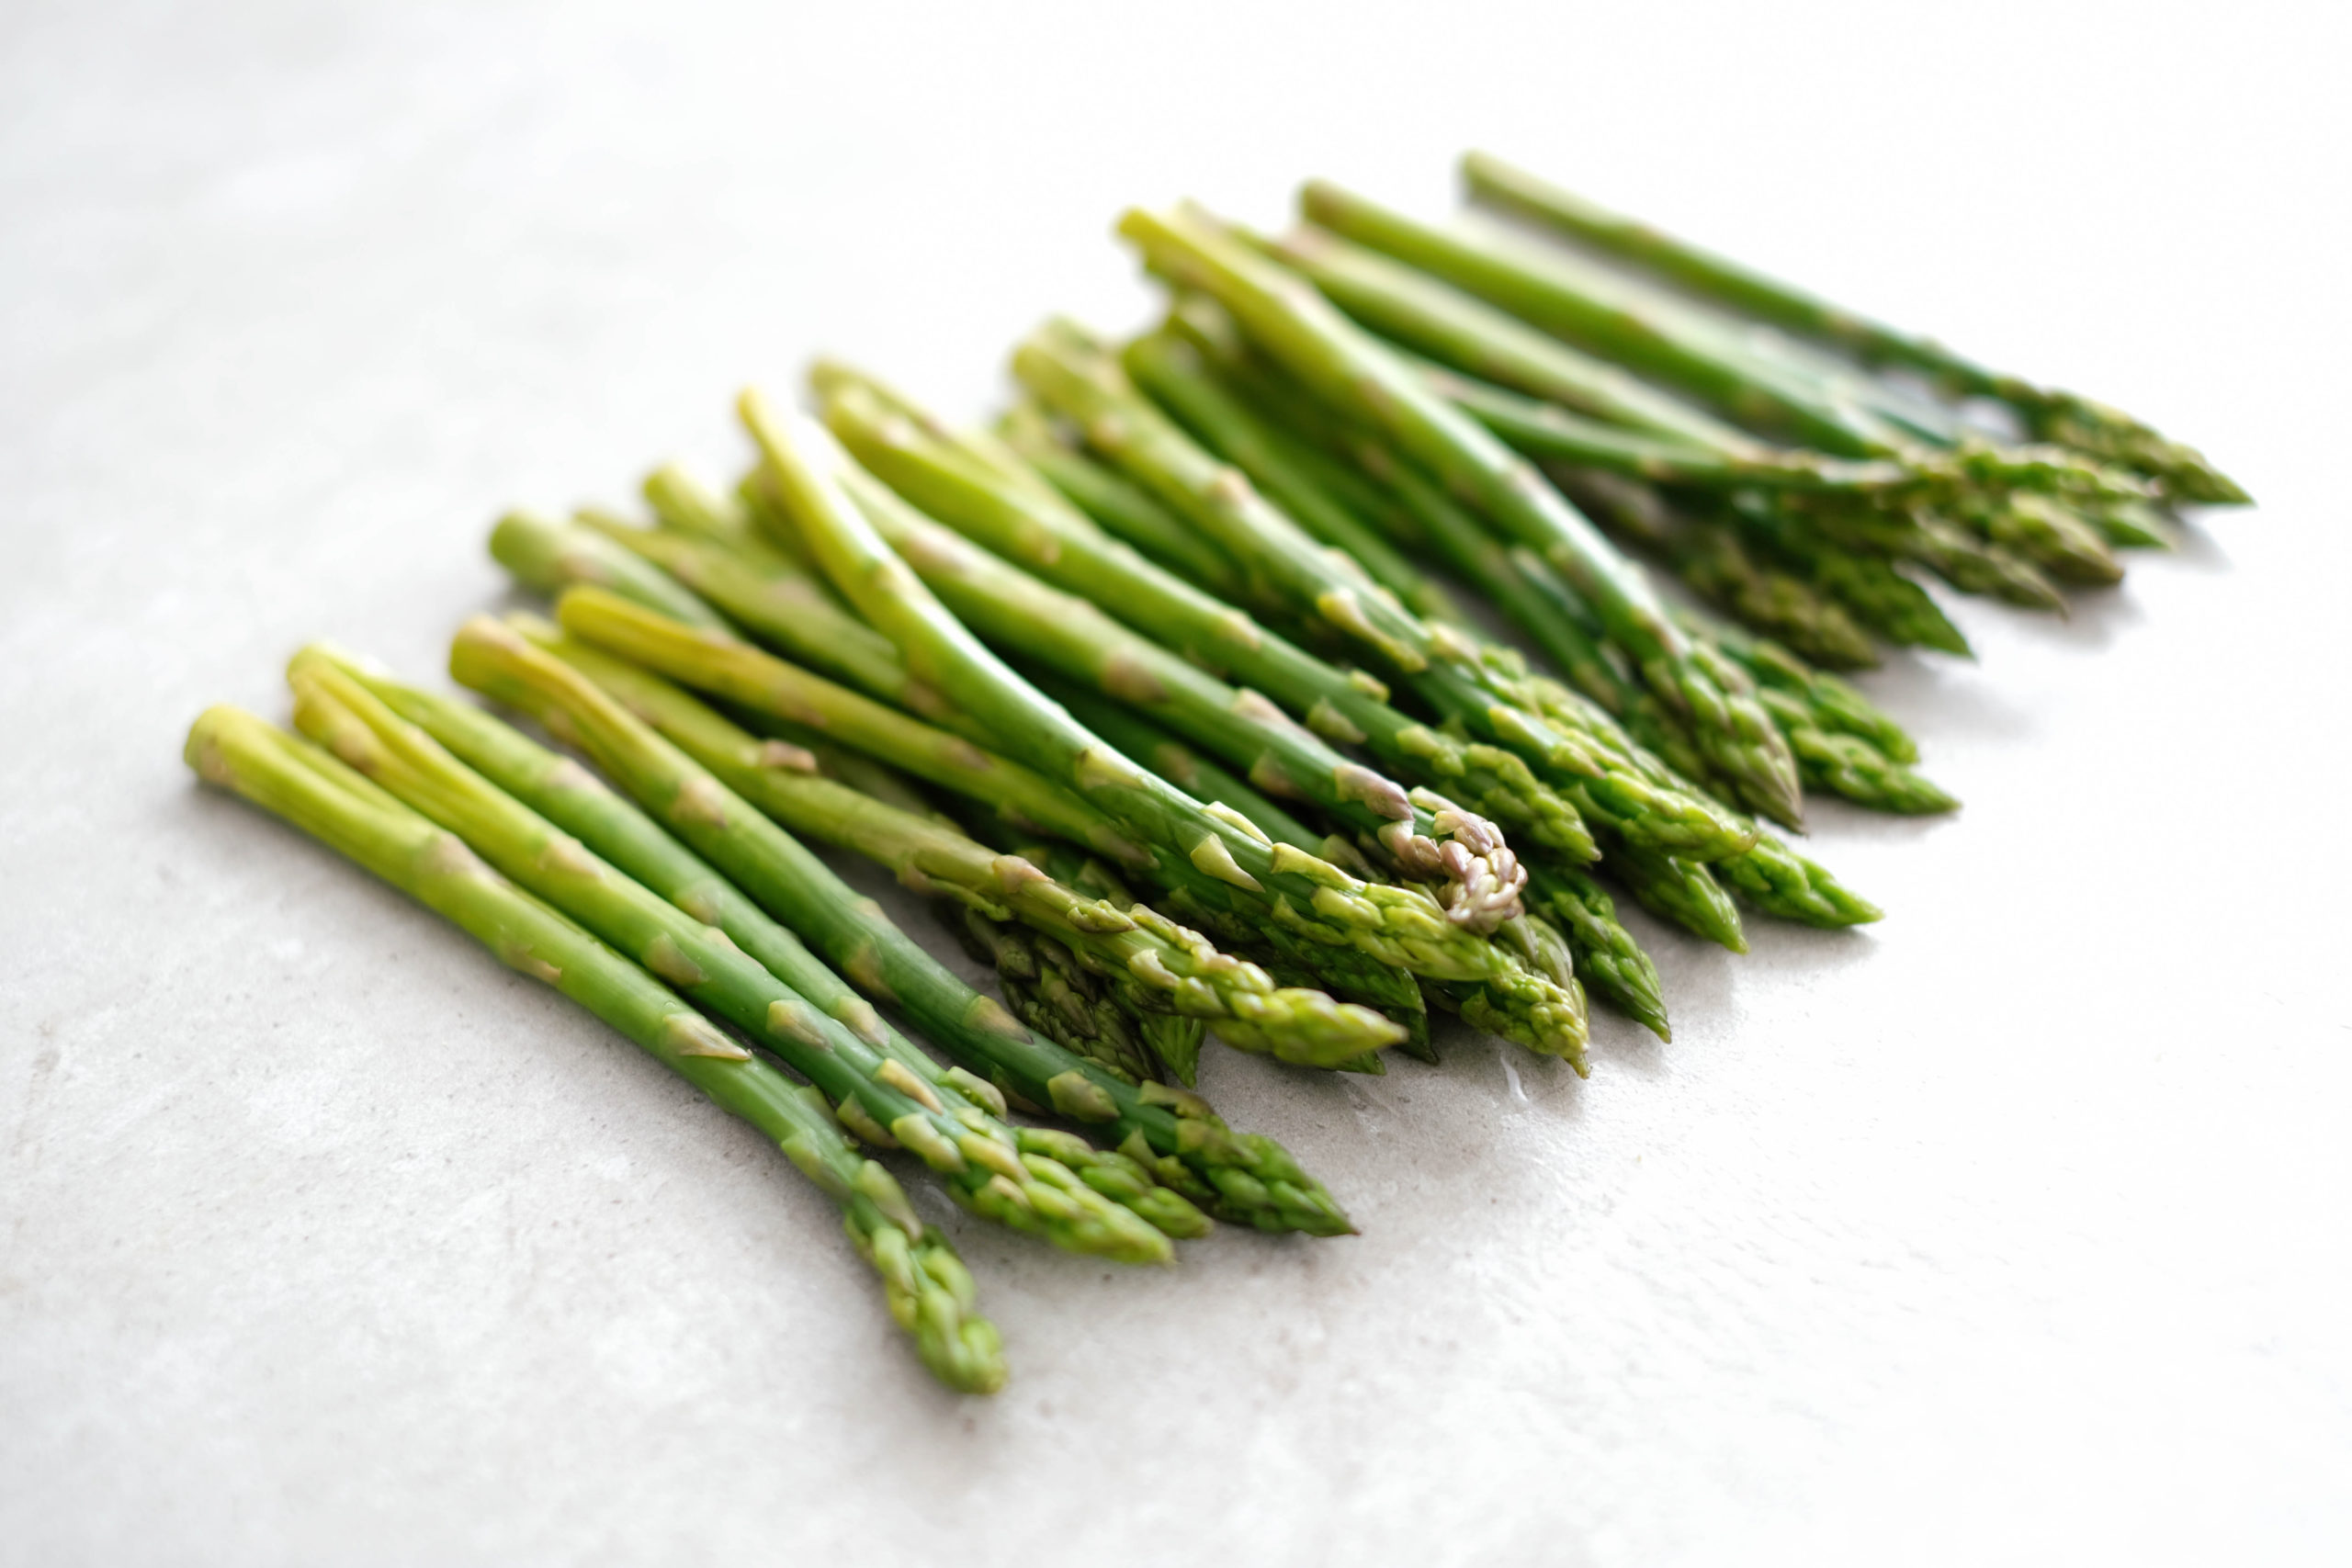 How to Cook Asparagus in a Skillet